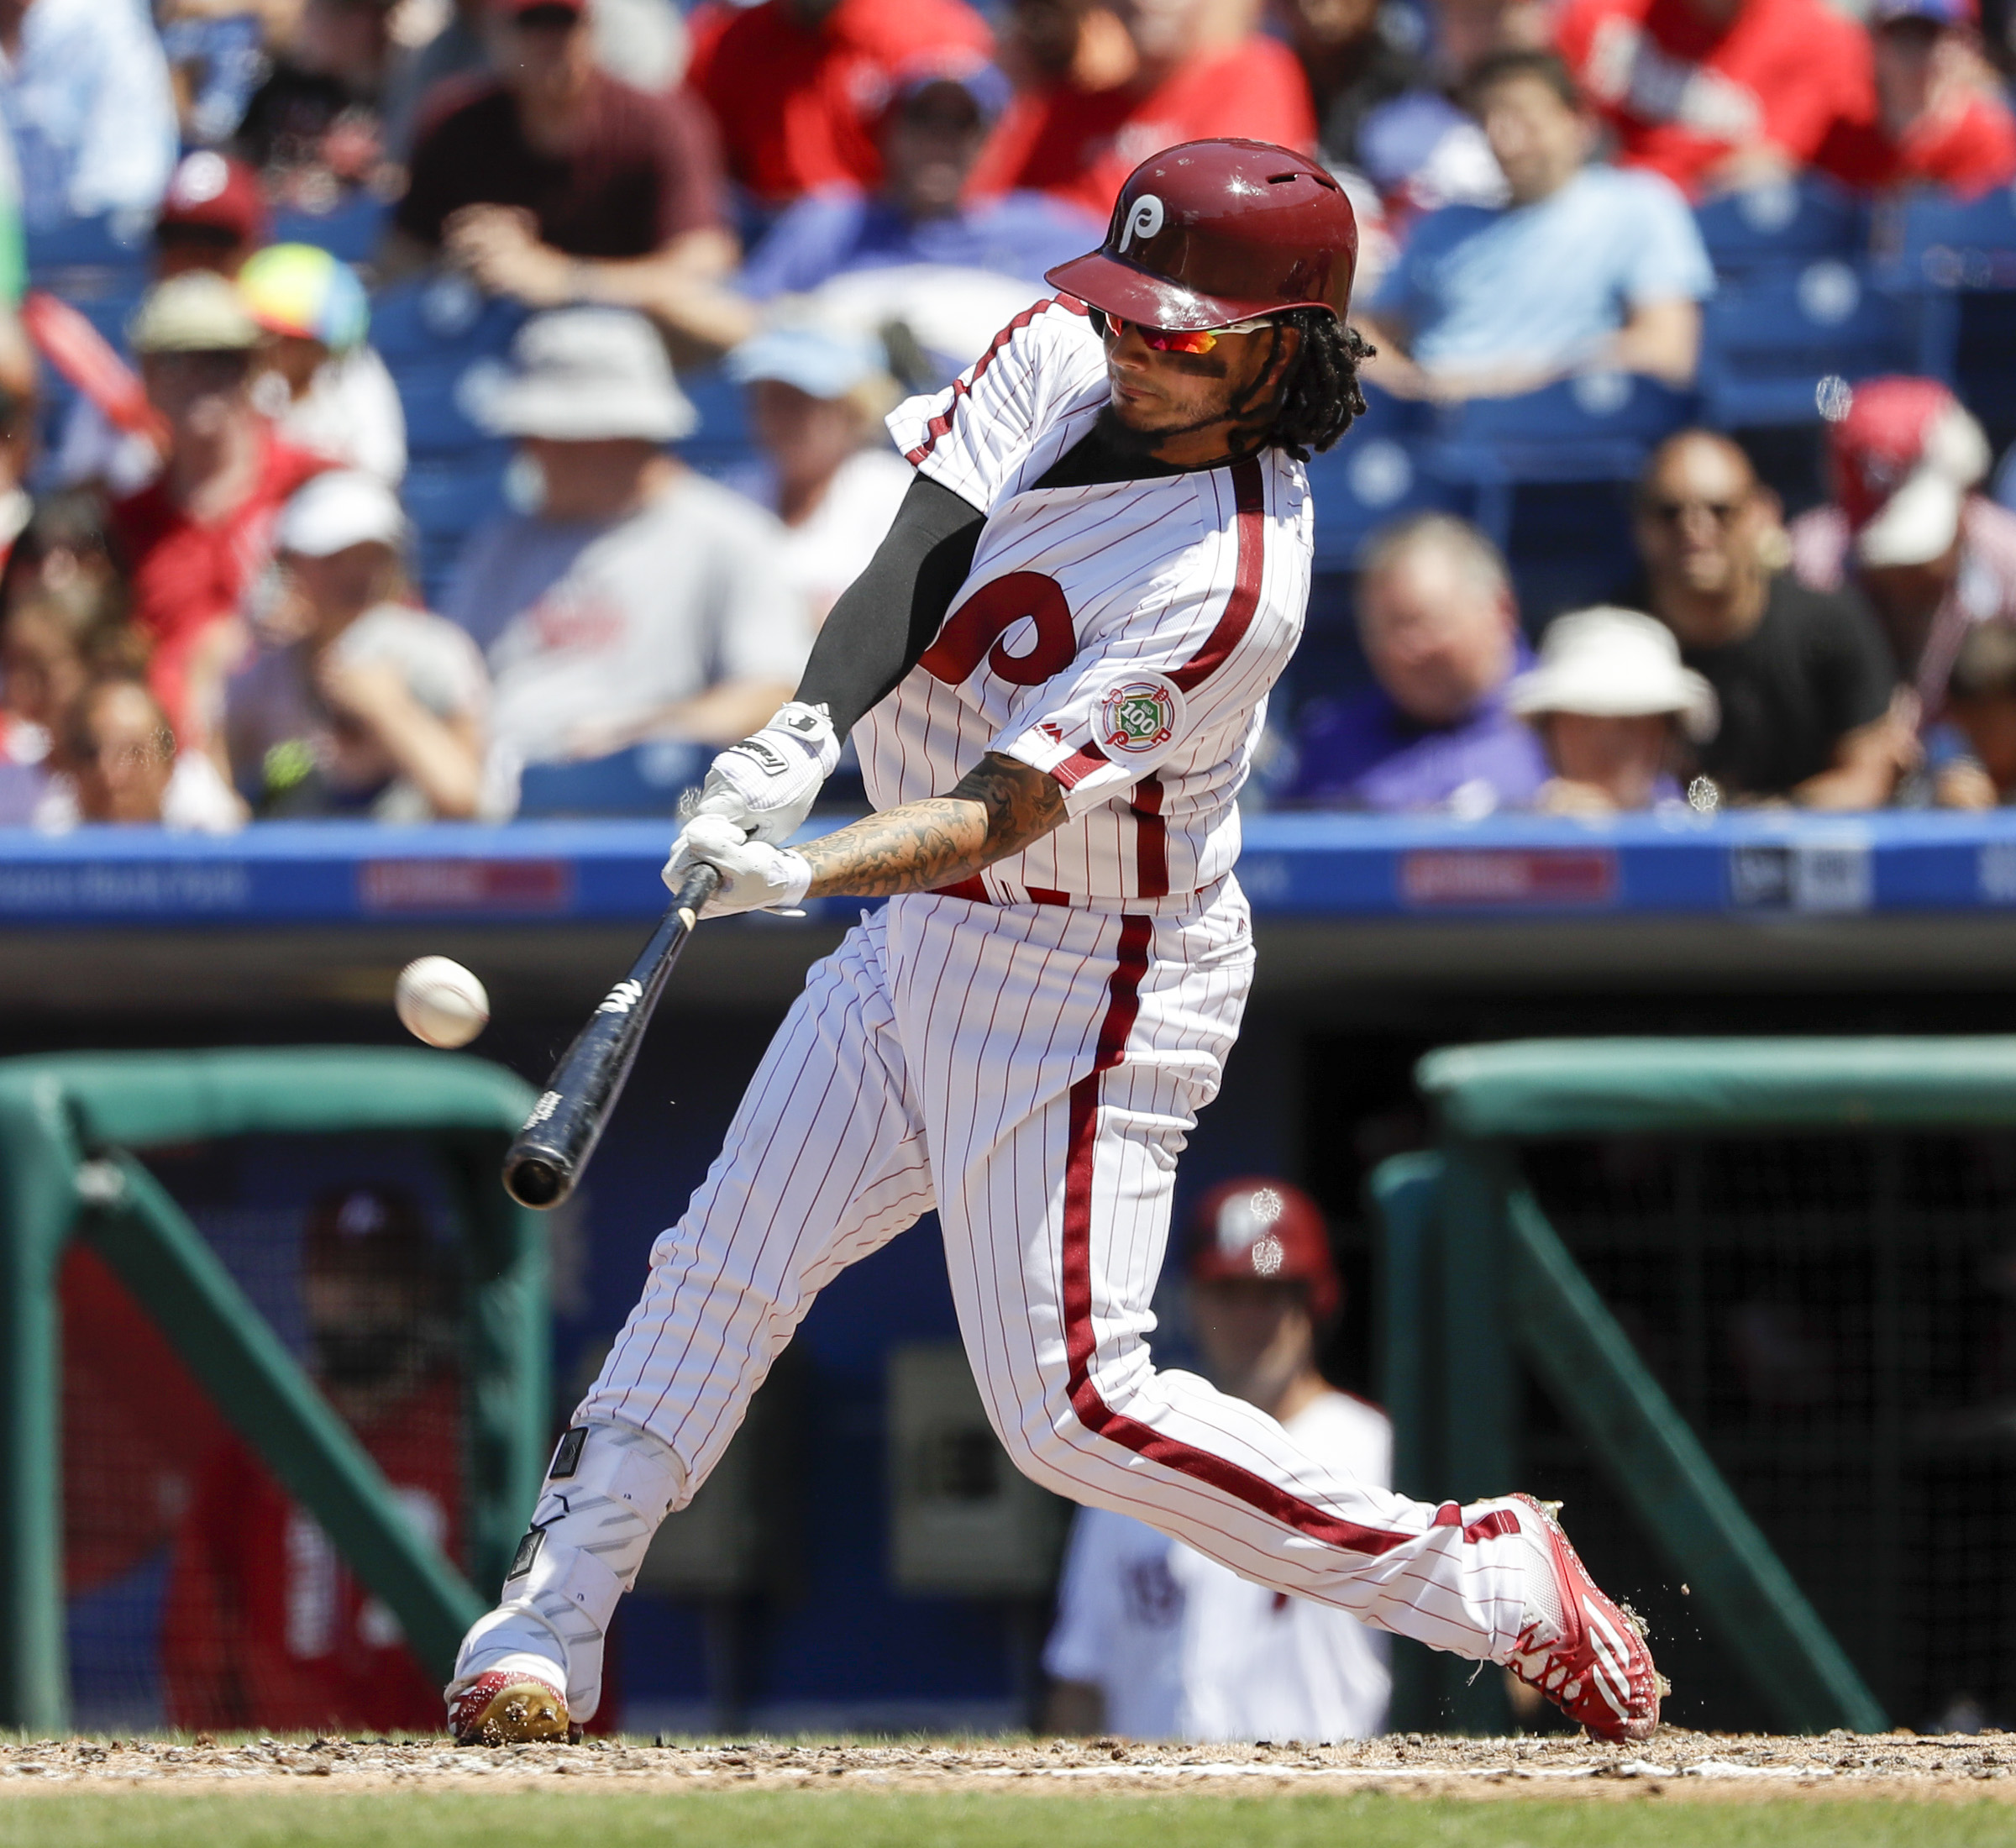 Phillies infielder Freddy Galvis diagnosed with infection caused by MRSA